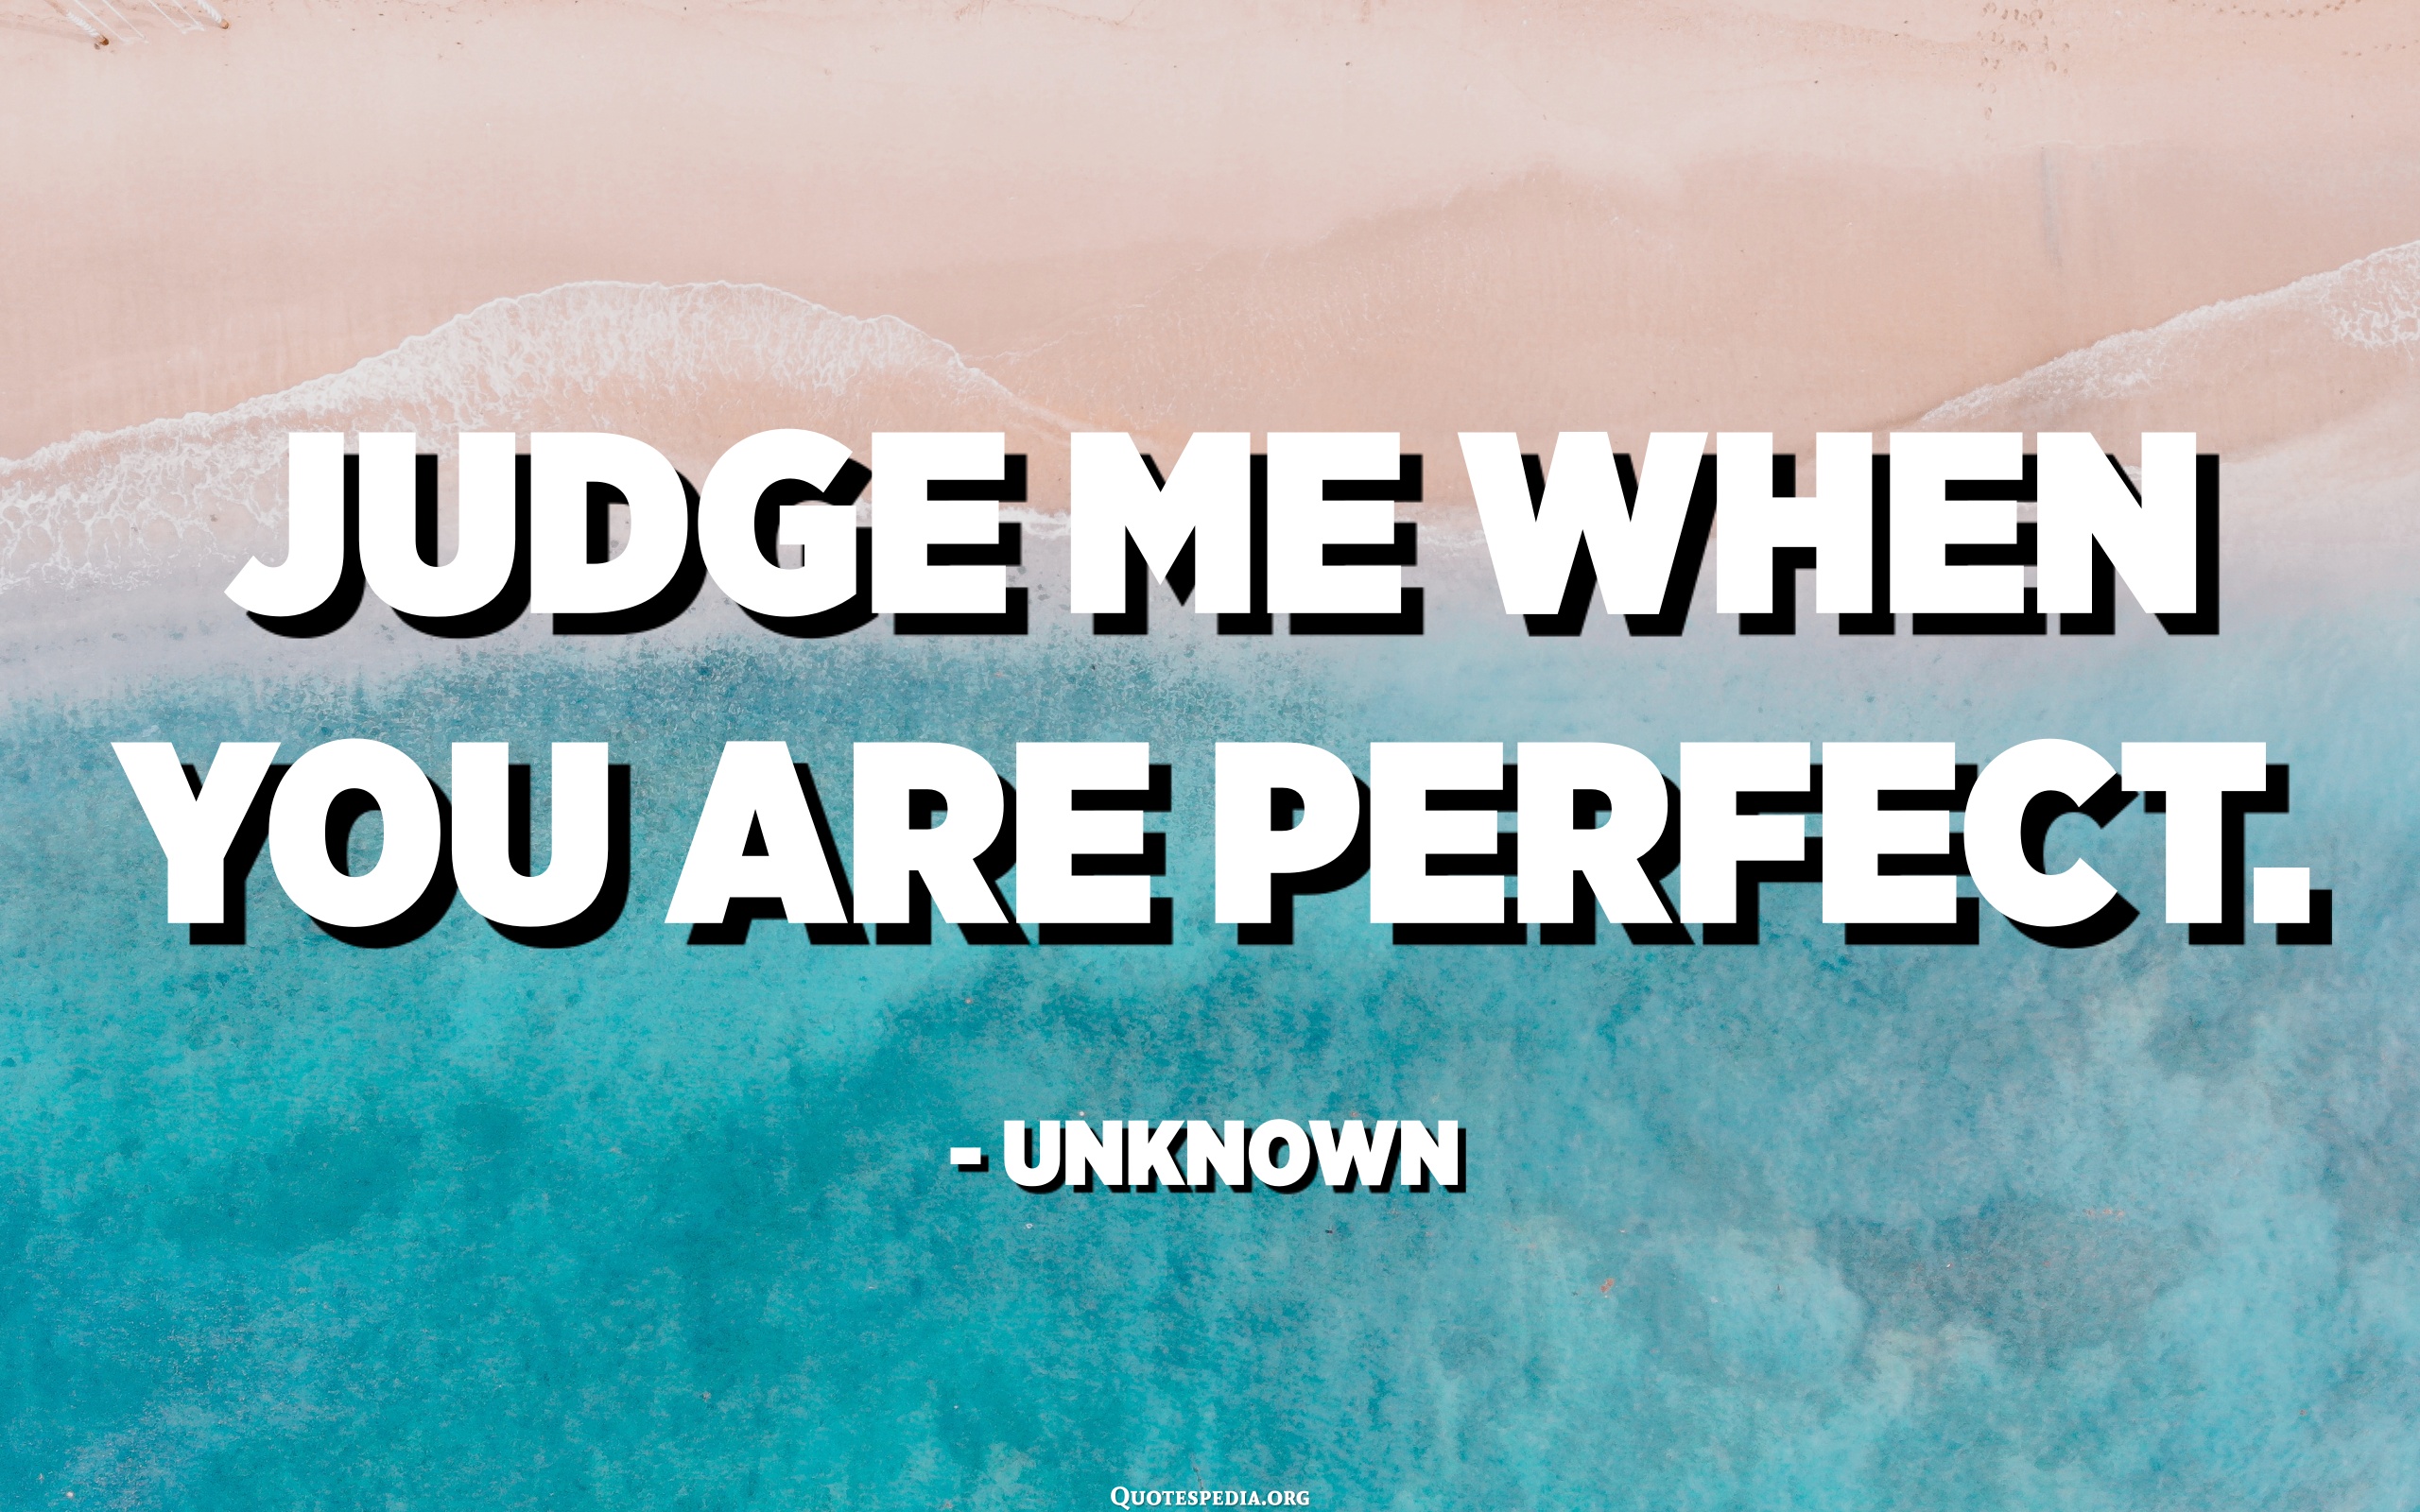 Judge me when you are perfect